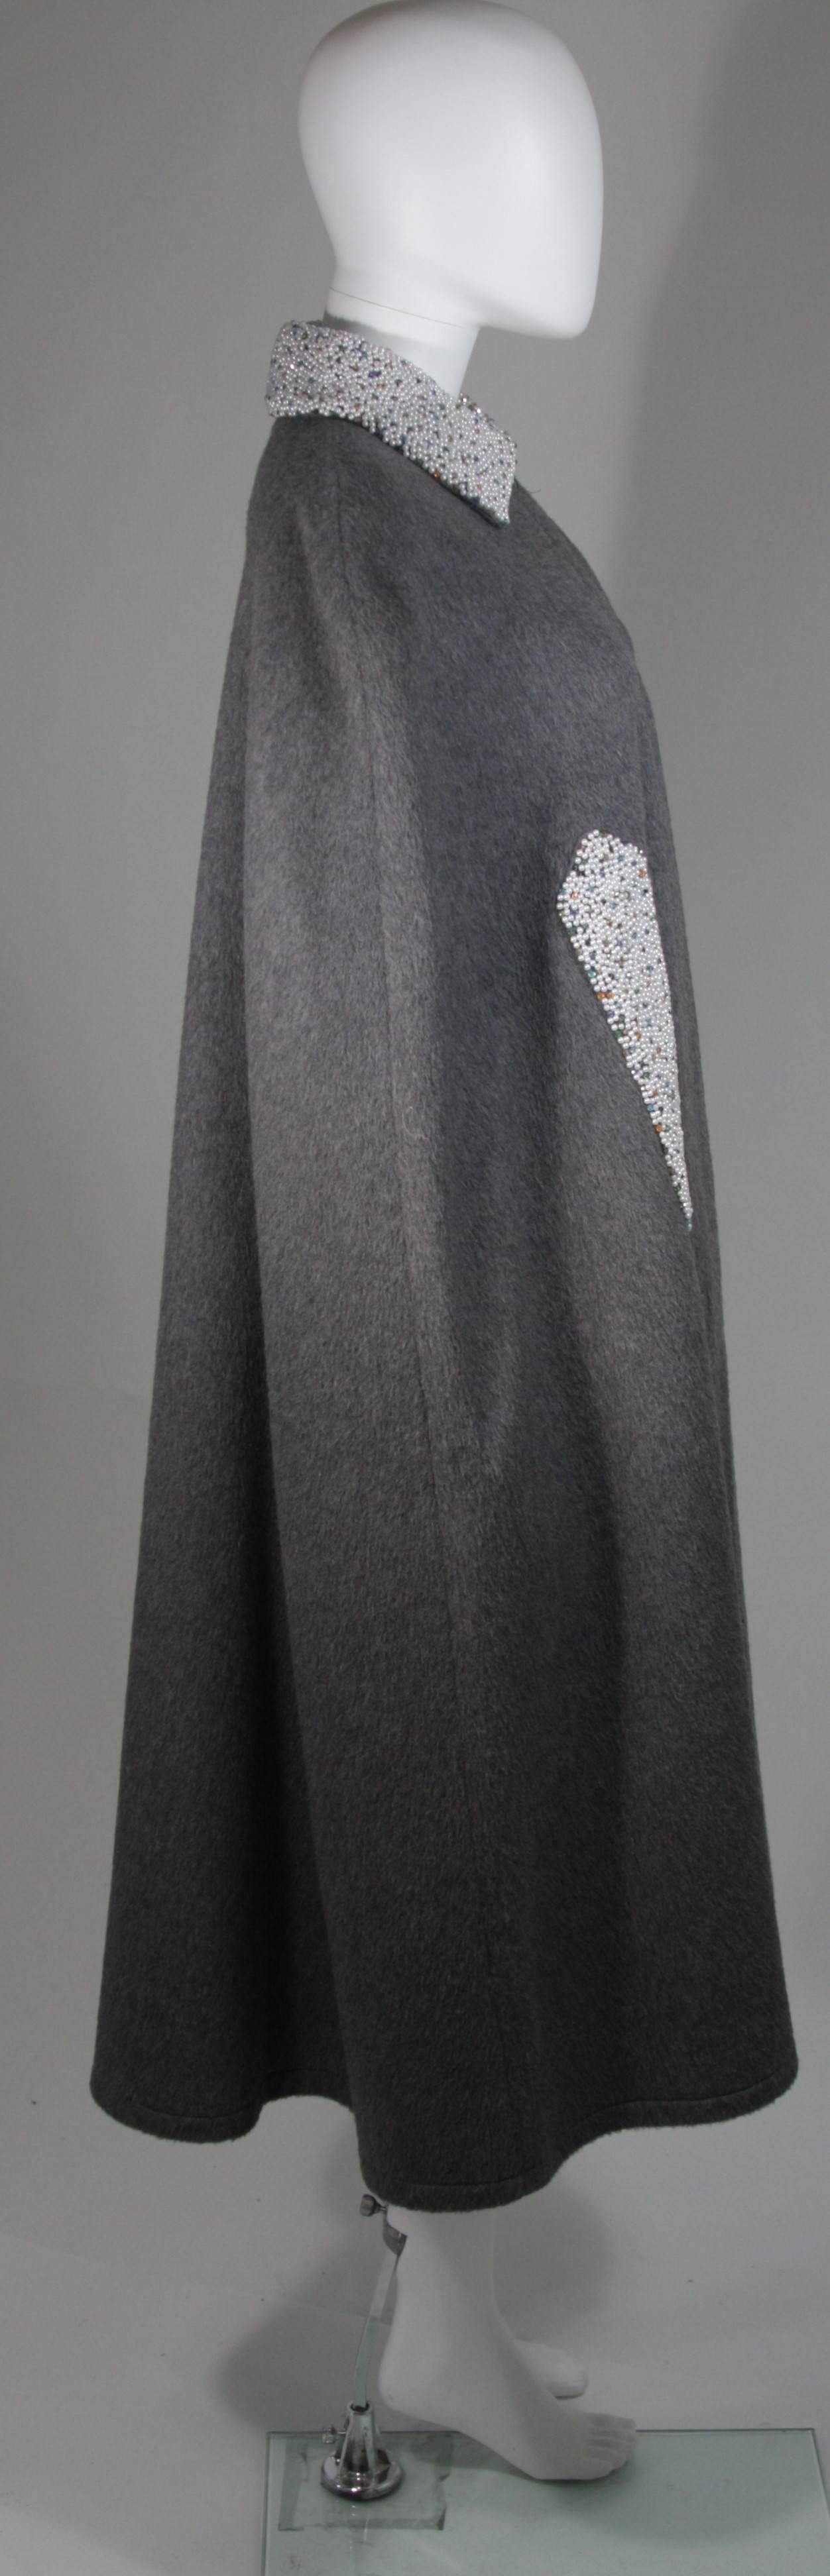 Vintage Grey Wool Cape with Pearl and Rhinestone Accents  For Sale 1